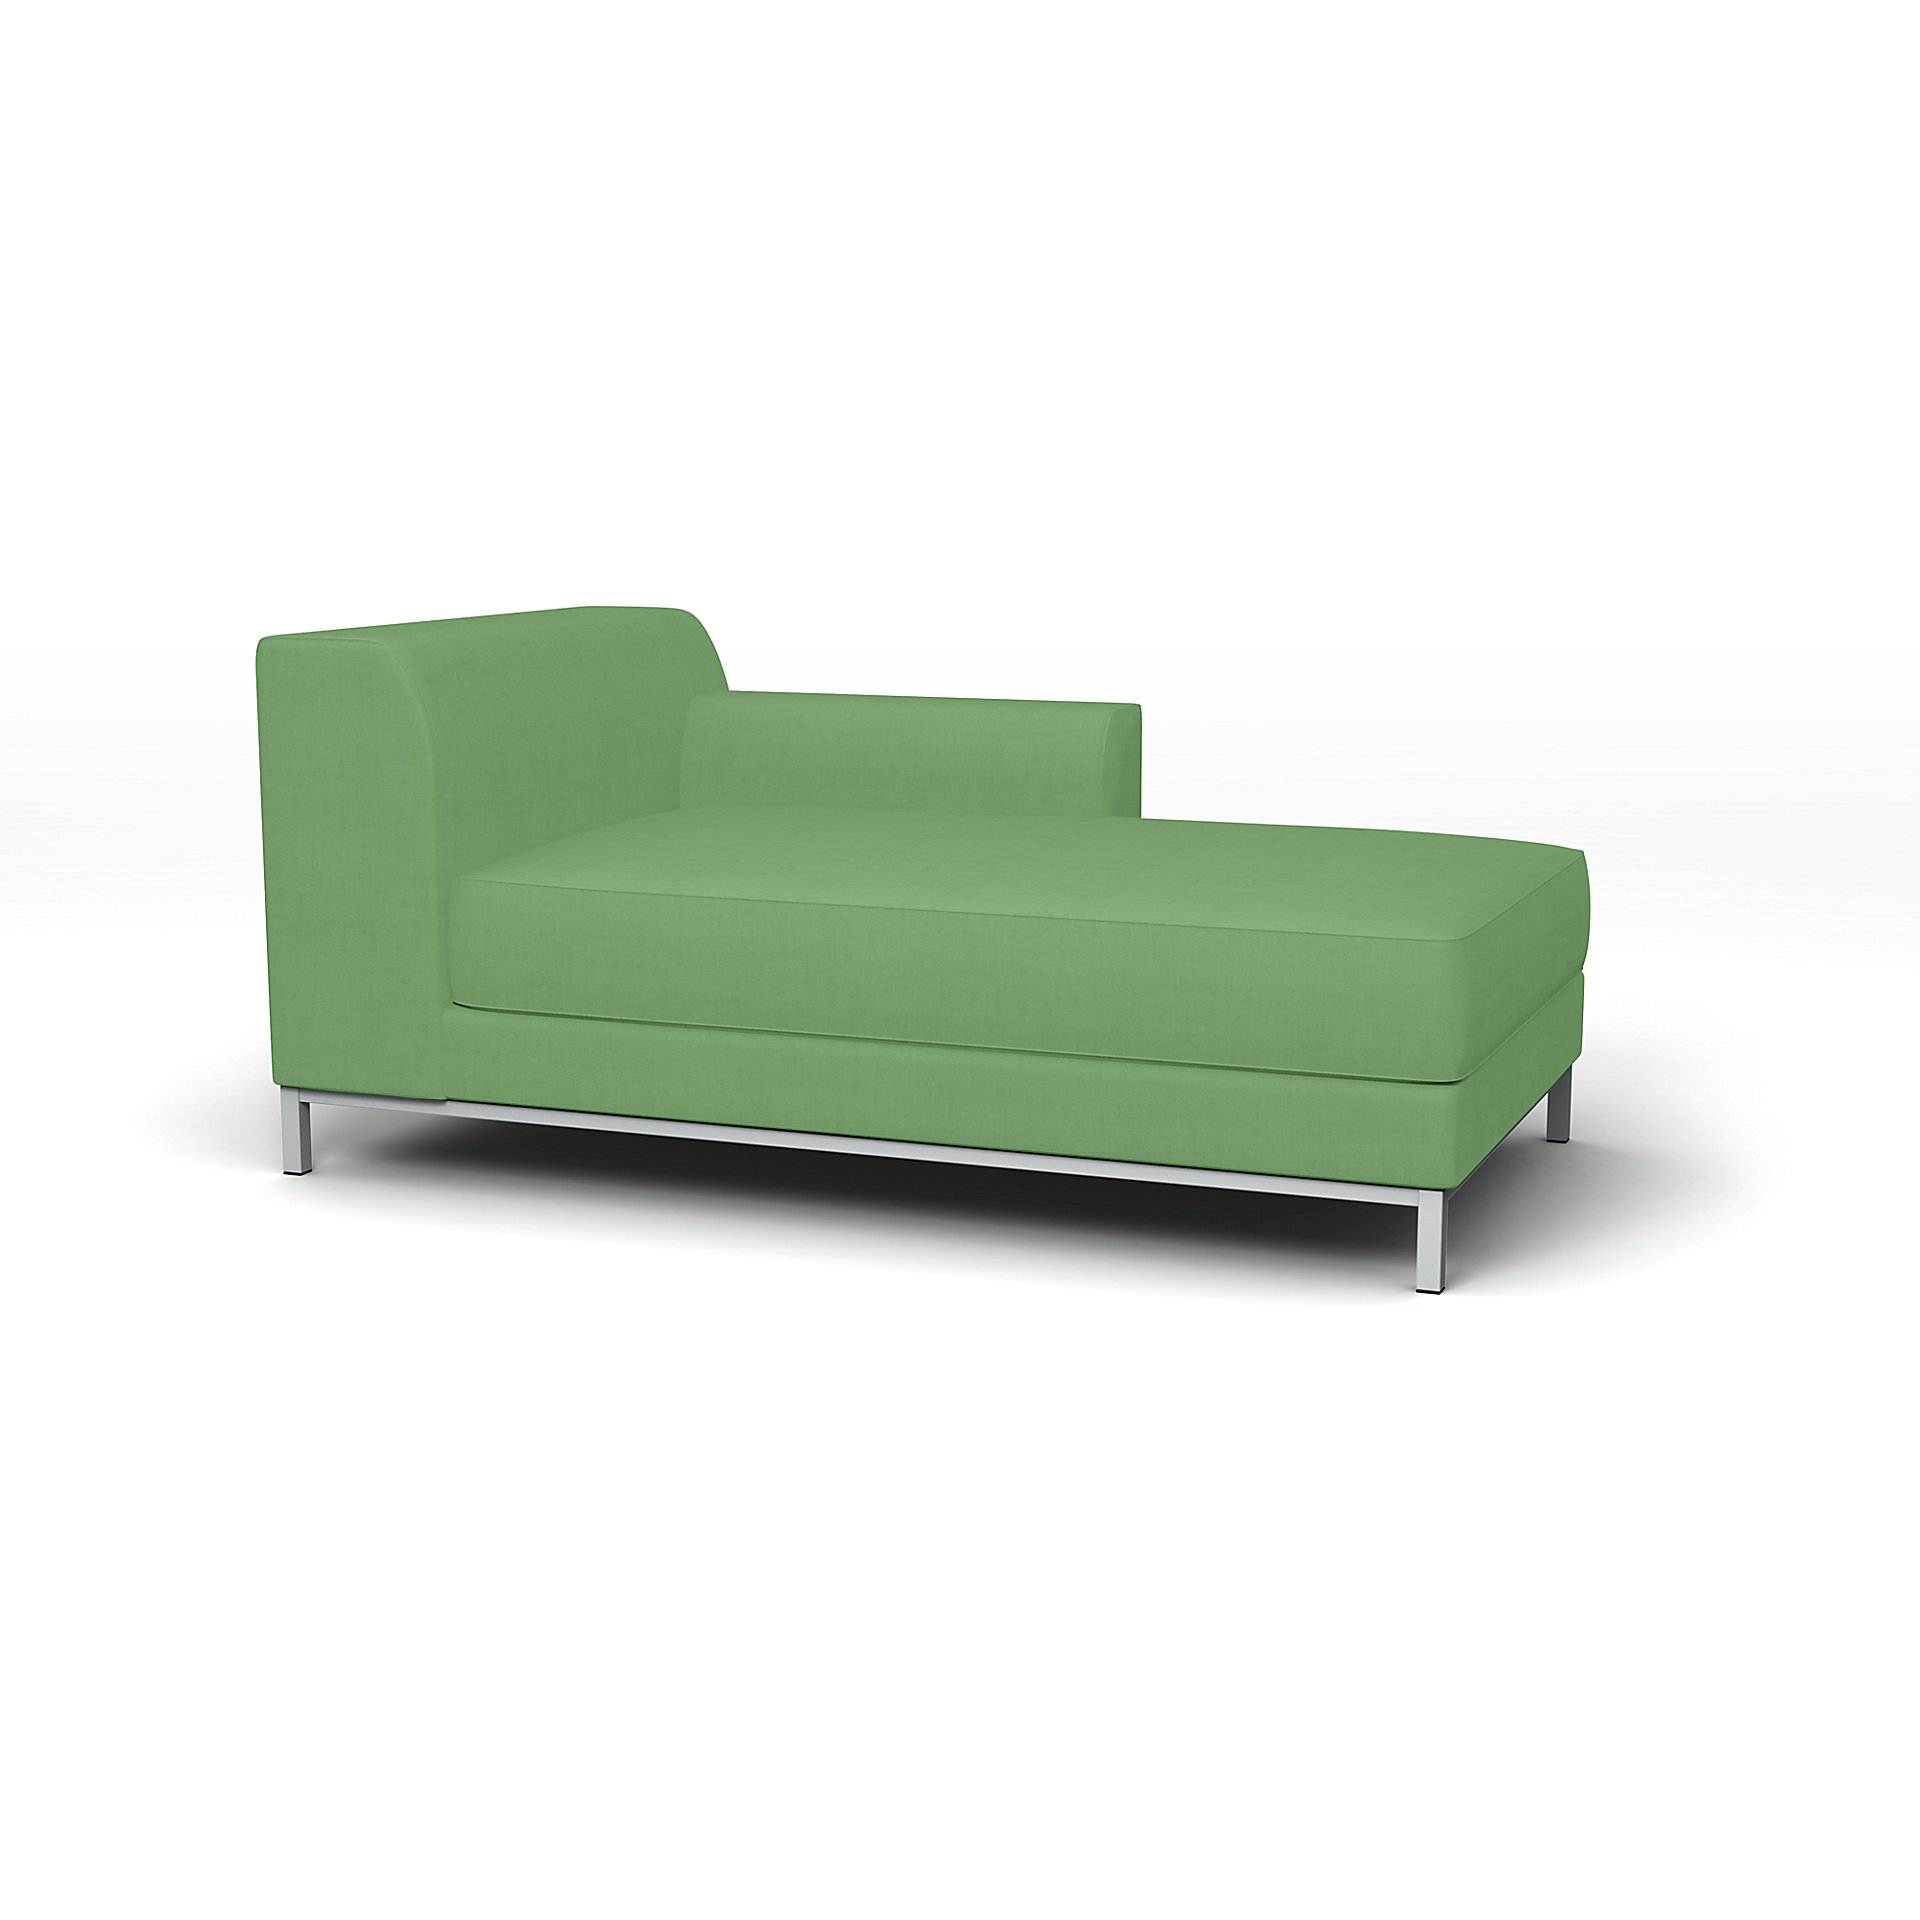 IKEA - Kramfors Chaise Longue with Right Arm Cover, Apple Green, Linen - Bemz